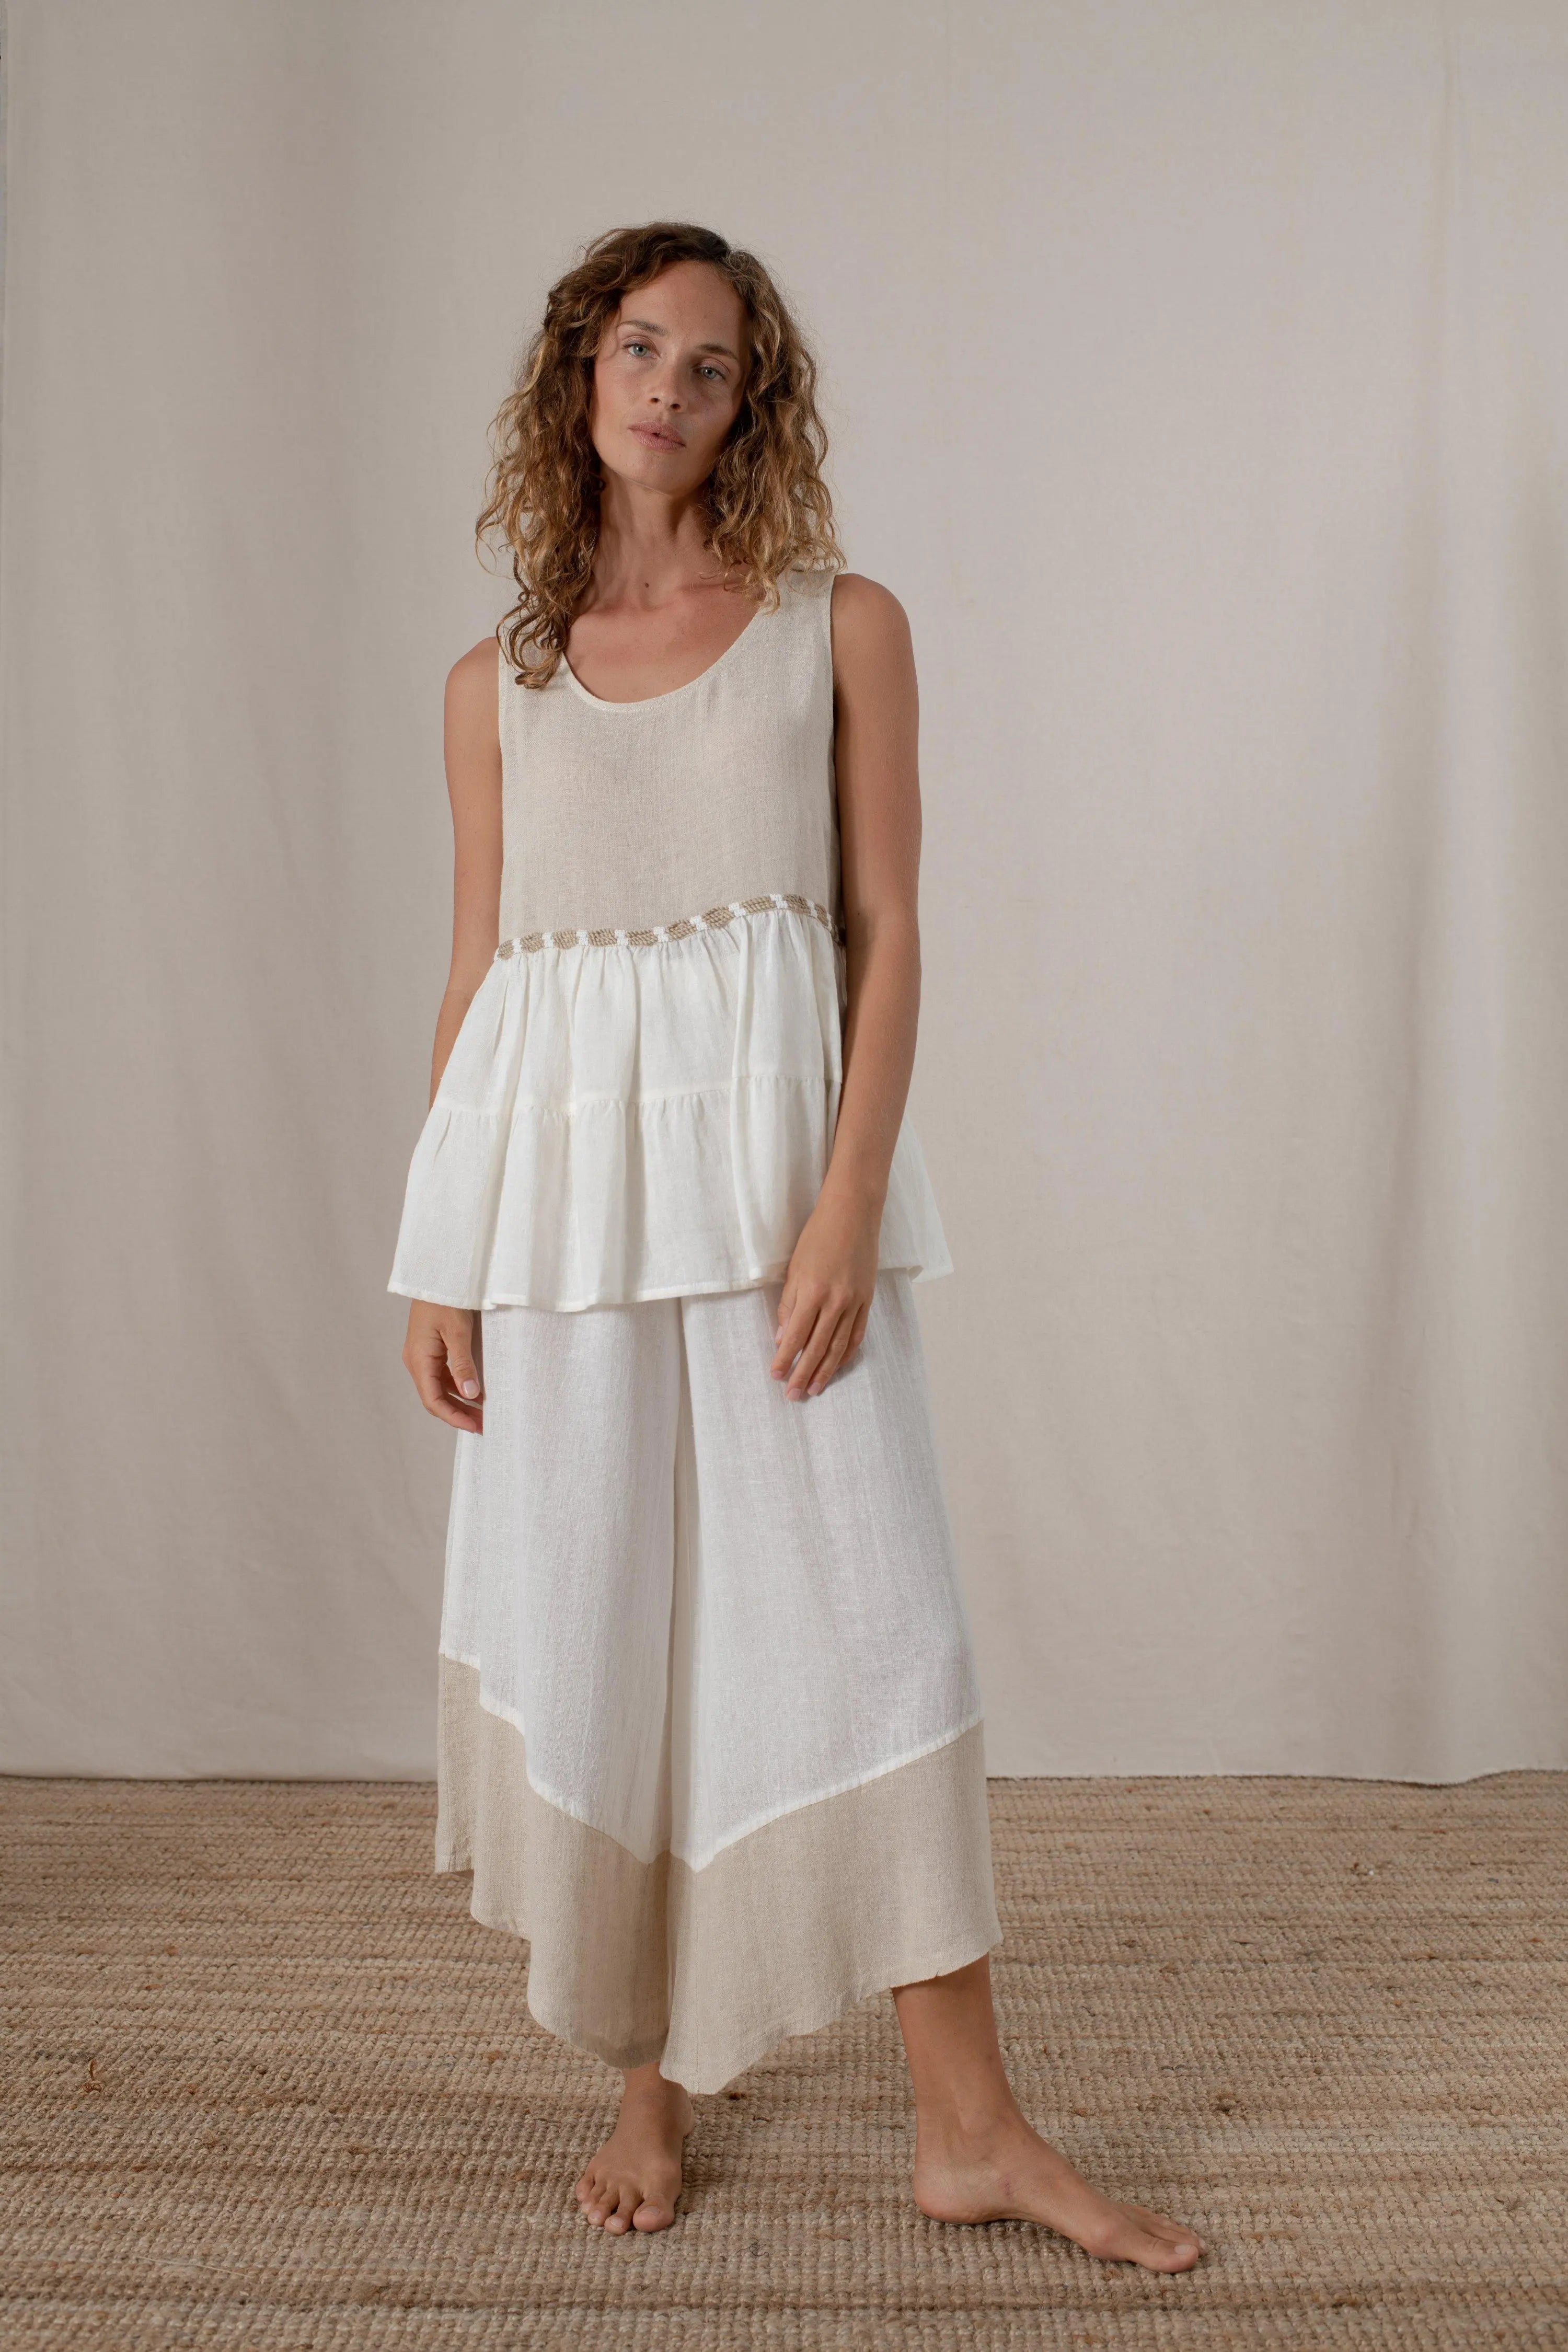 Linen Sleeveless Top from Inizio Hi-Low - Natural Clothing Company